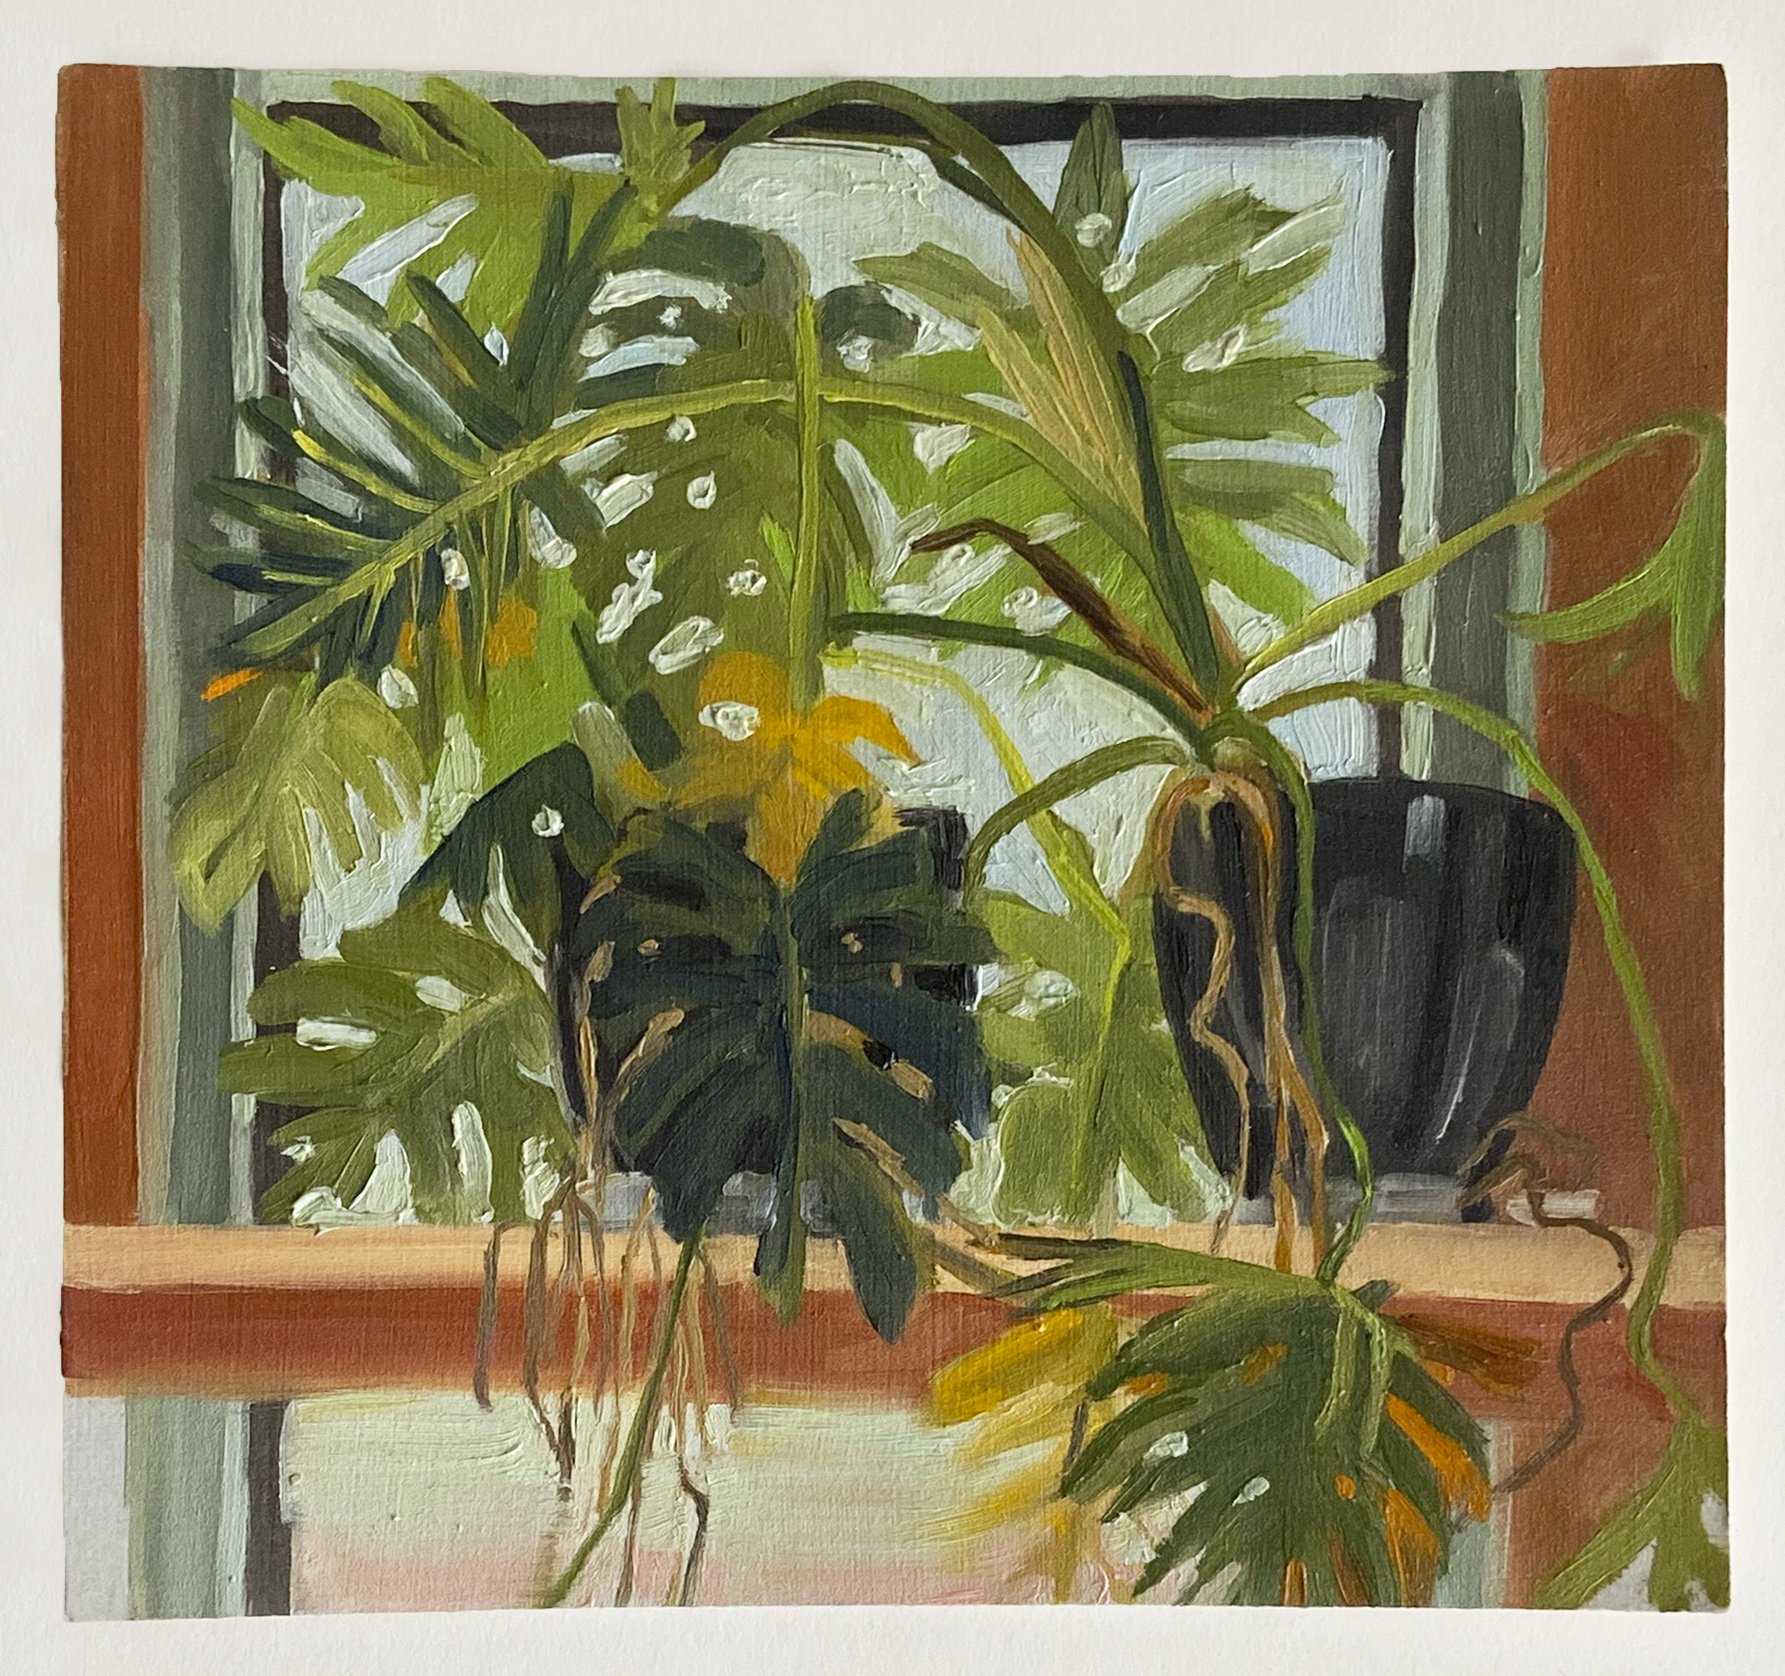   Kathleen Eastwood-Riaño ,  Colleen's Monstera , 2017, oil on board, 7 1/2 x 8 1/8” 